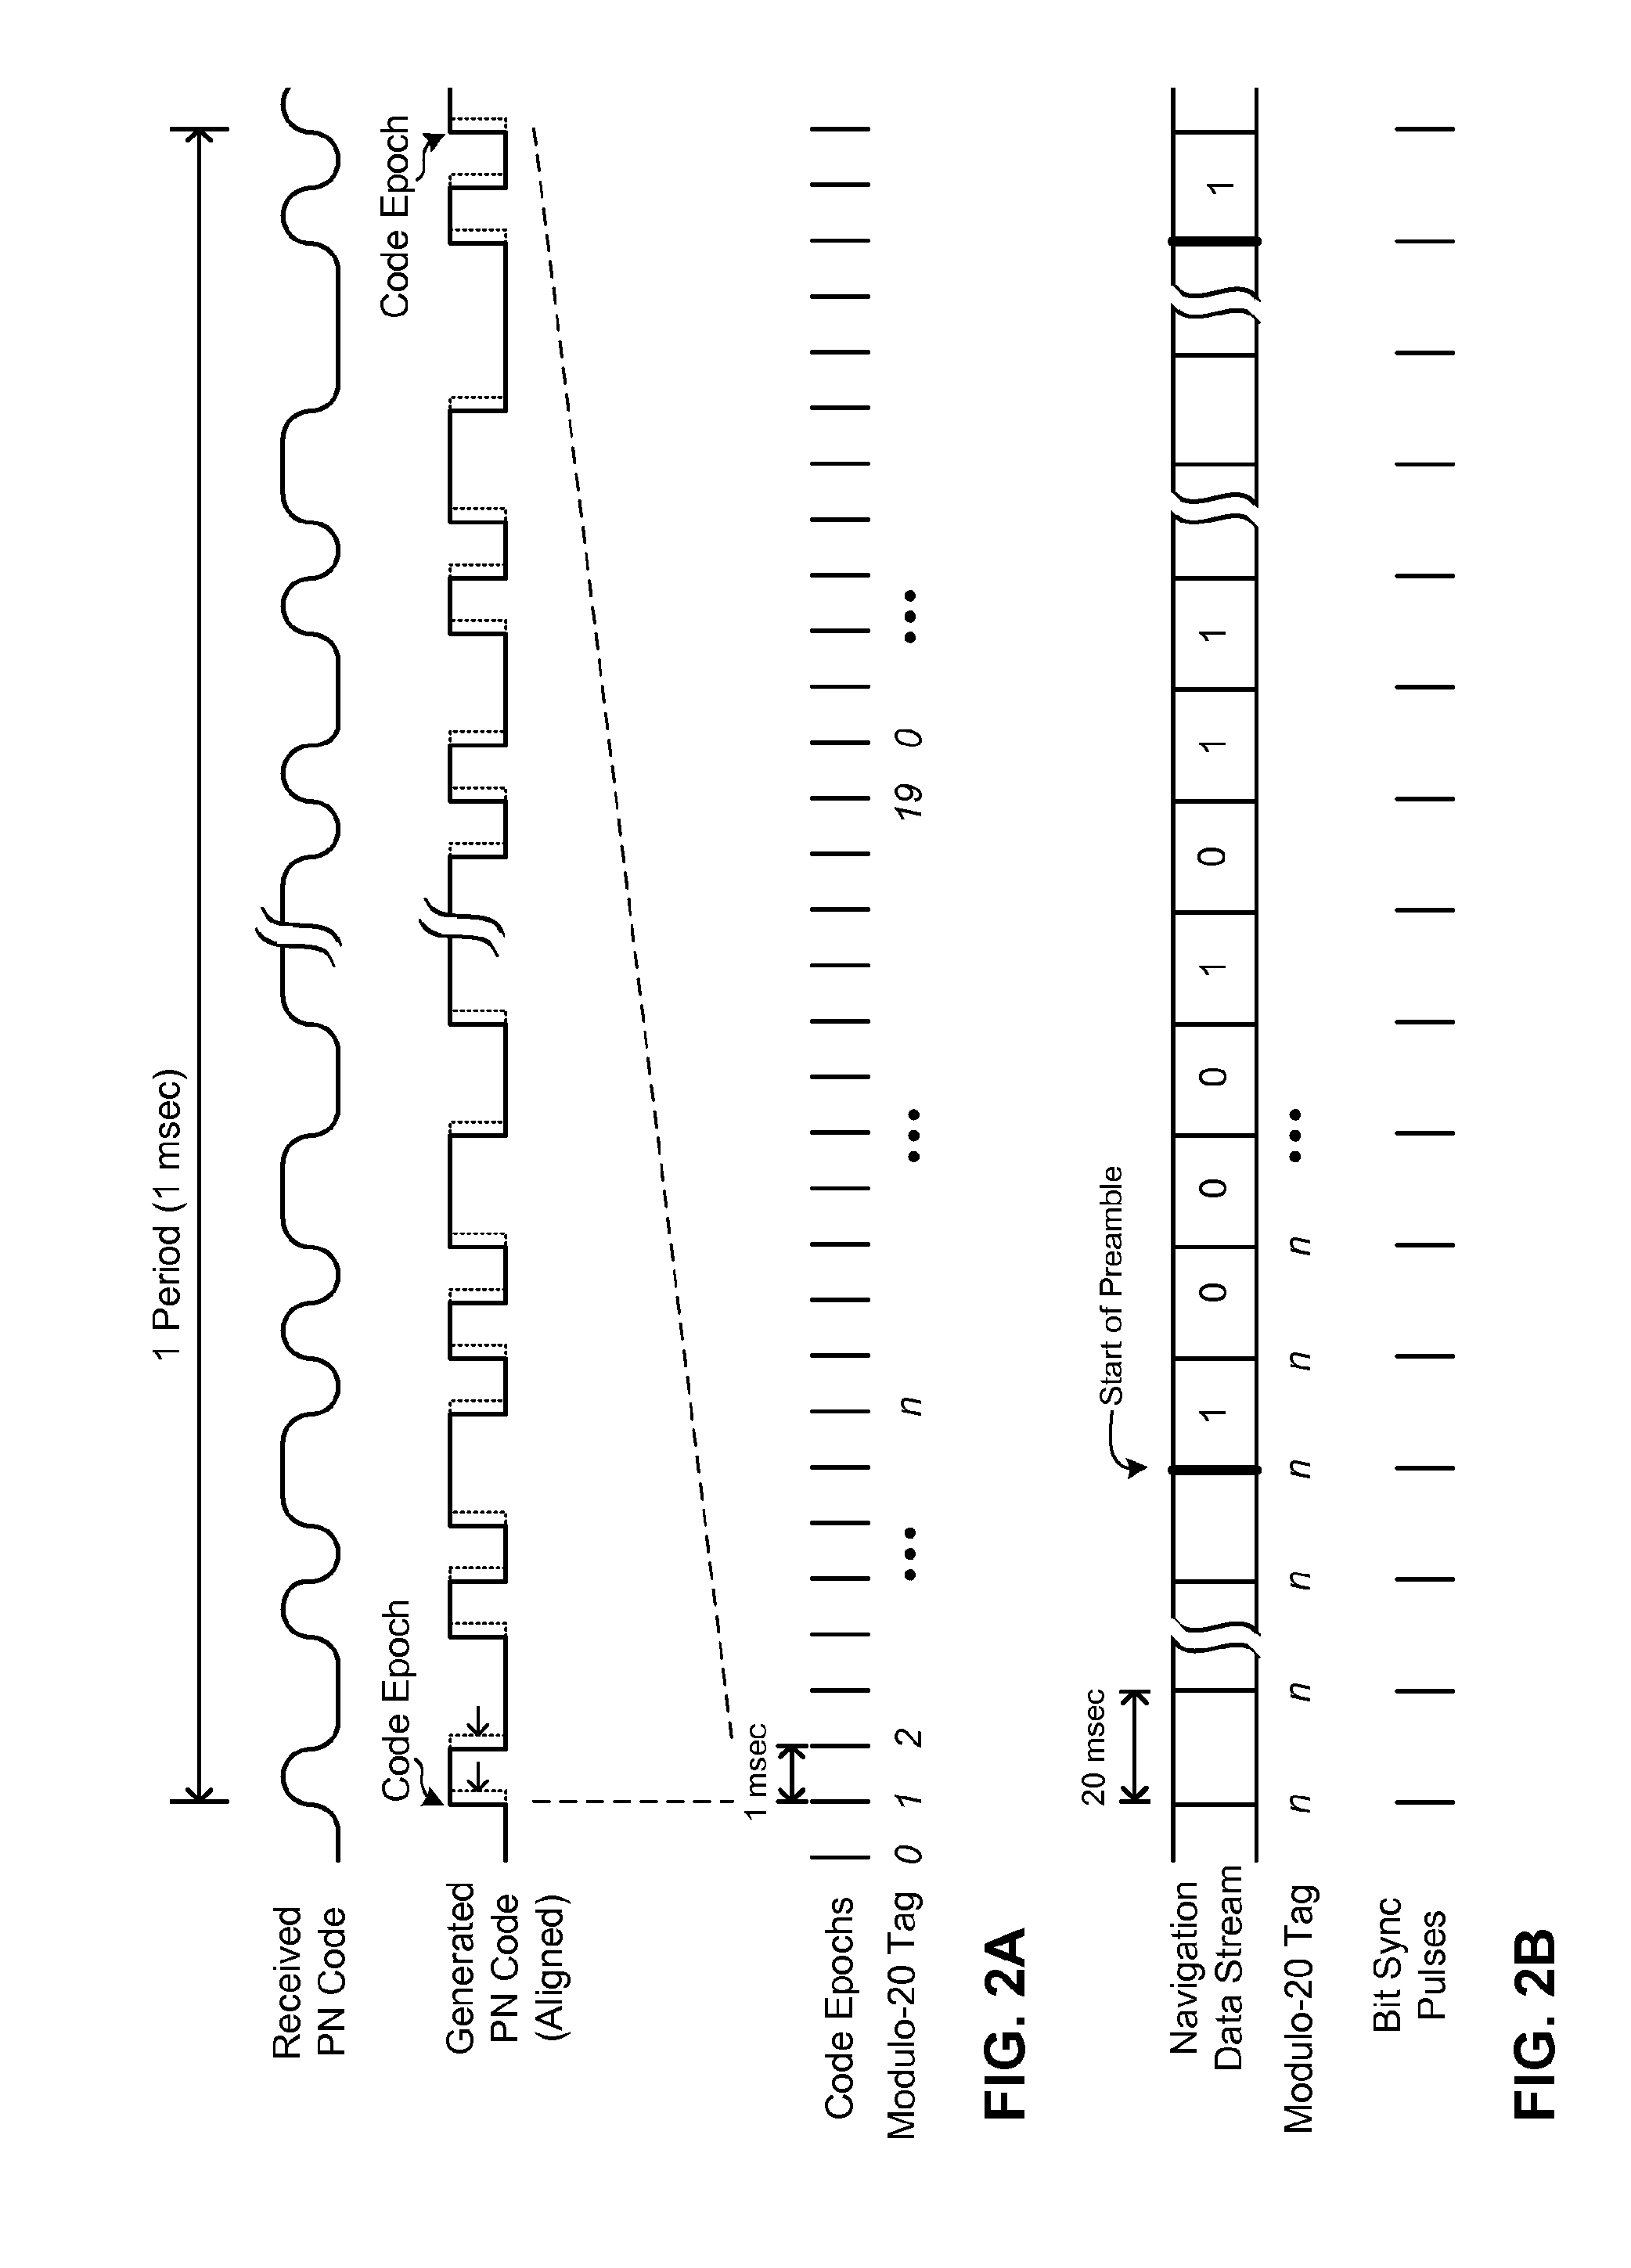 Method and apparatus for acquisition, tracking, and sub-microsecond time transfer using weak gps/gnss signals